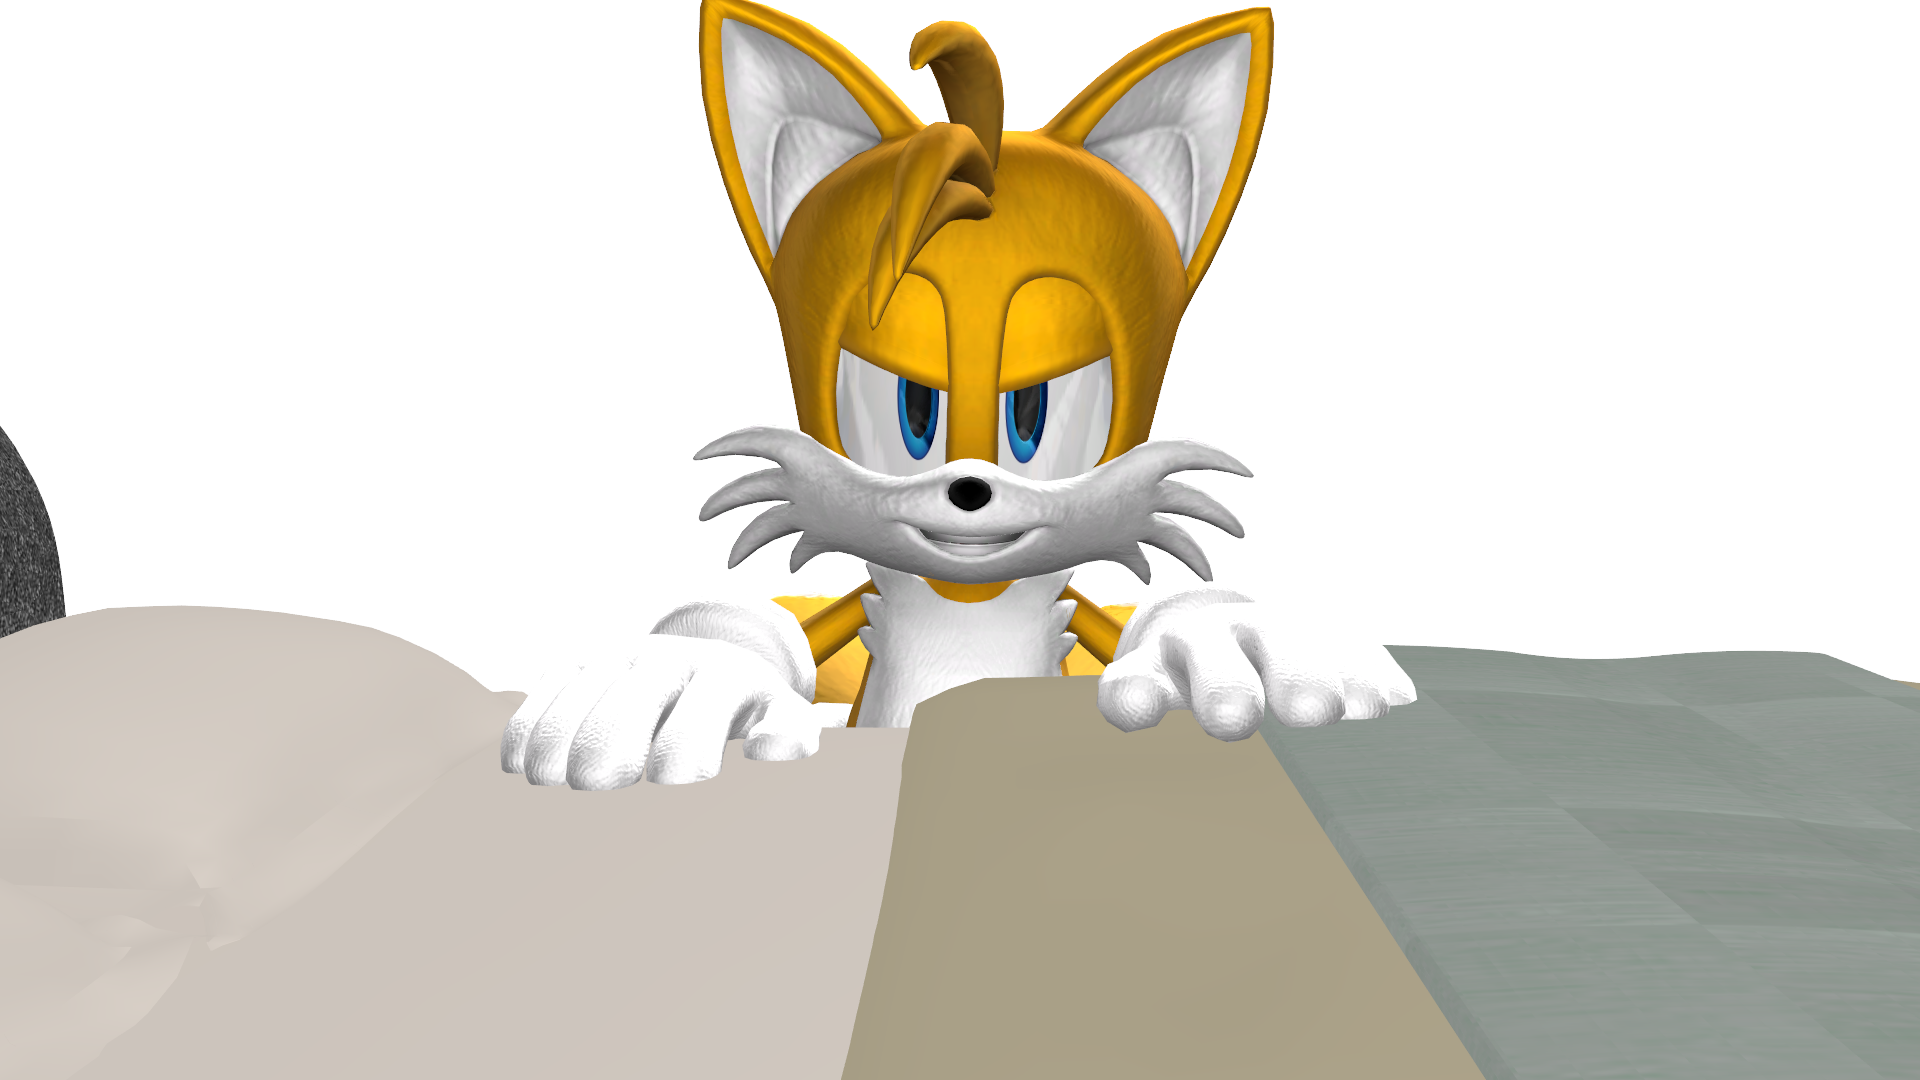 mmd) Tails.exe by S213413 on DeviantArt